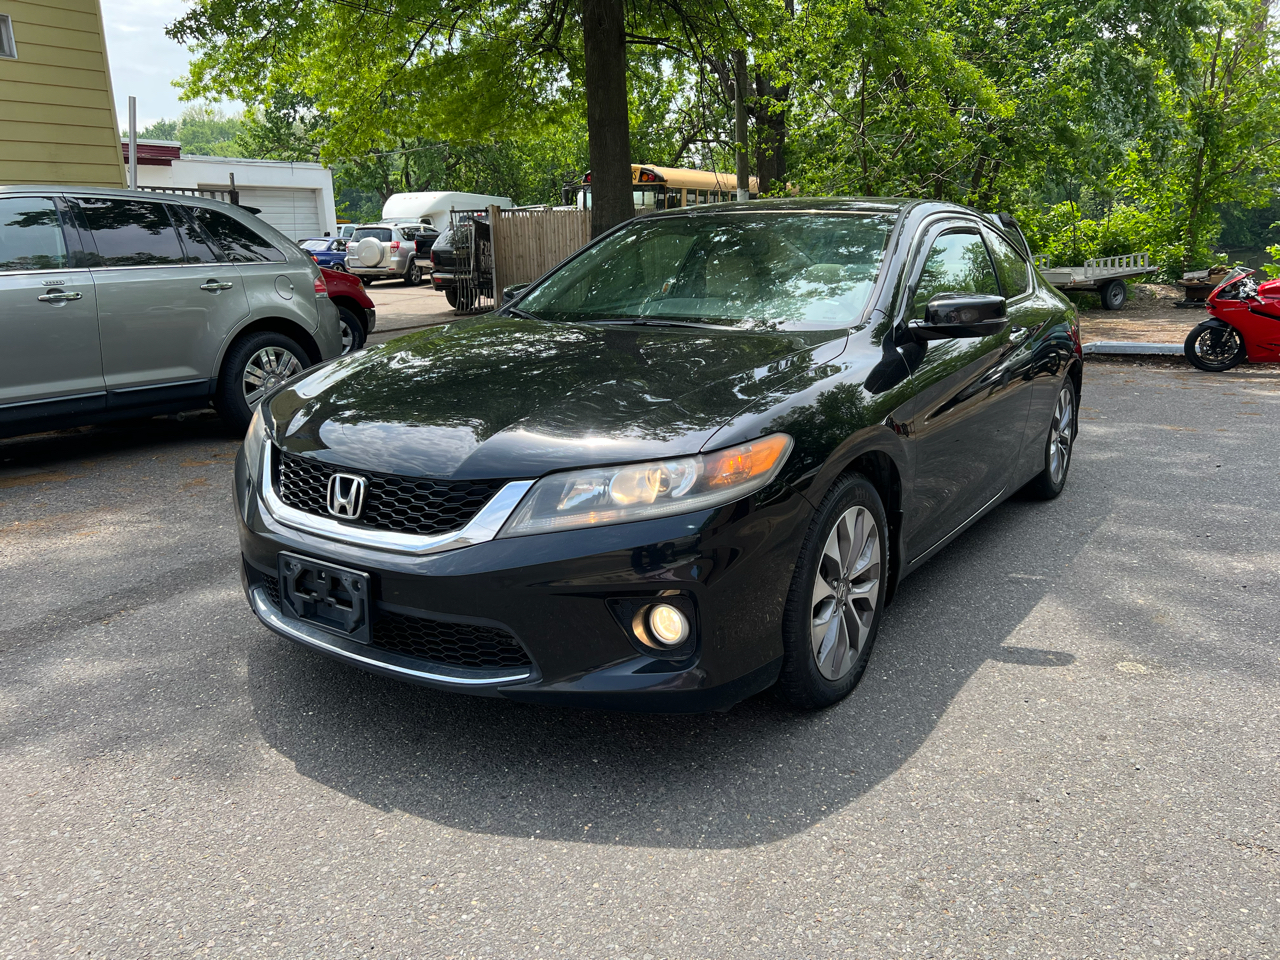 Preowned 2014 HONDA Accord EX-L Coupe CVT for sale by Mike's Auto Sales in Garfield, NJ